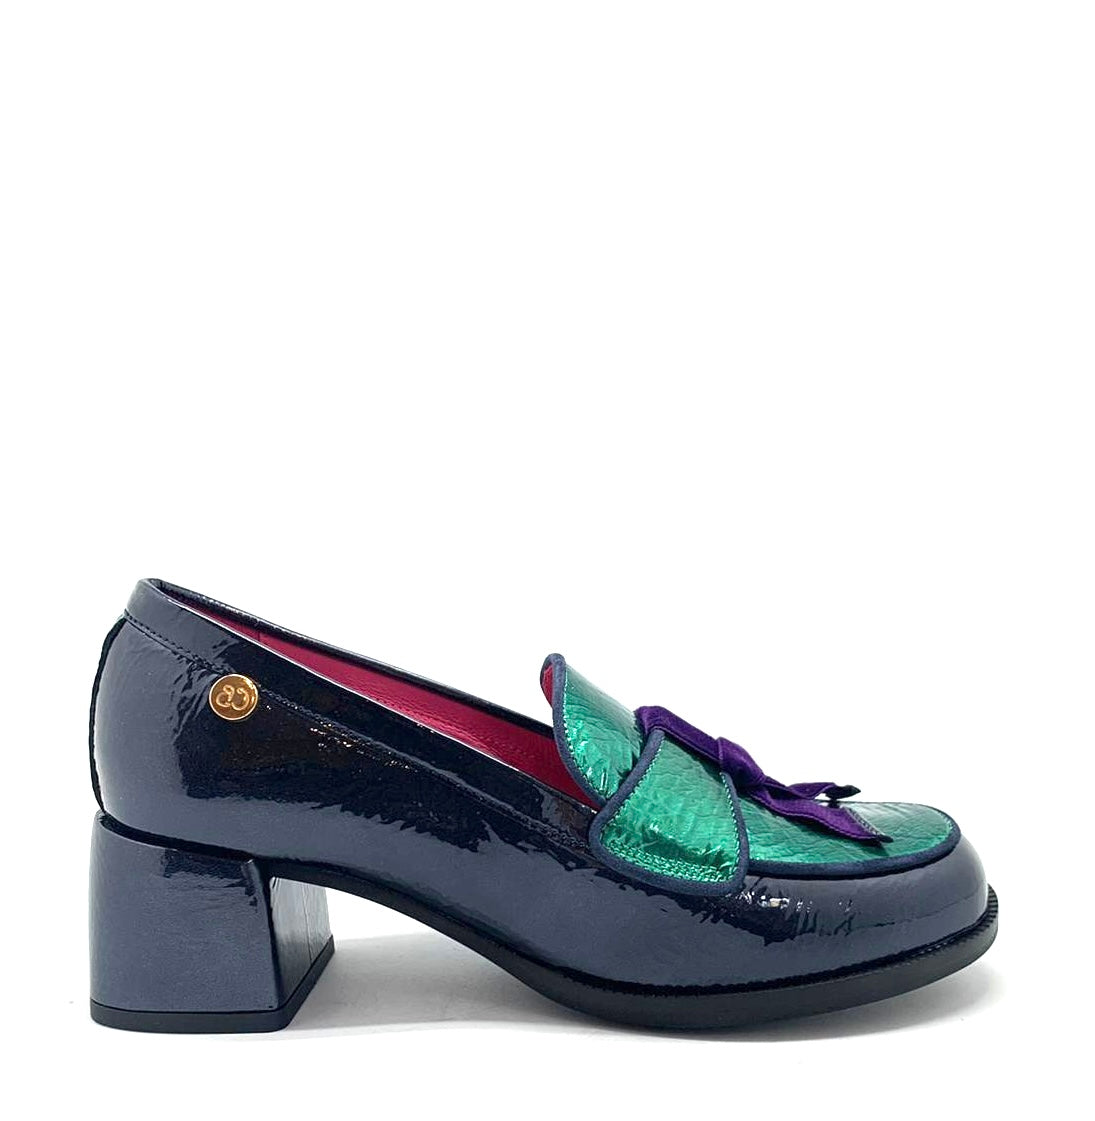 Bespoke footwear named Arc - Navy and Green Loafer